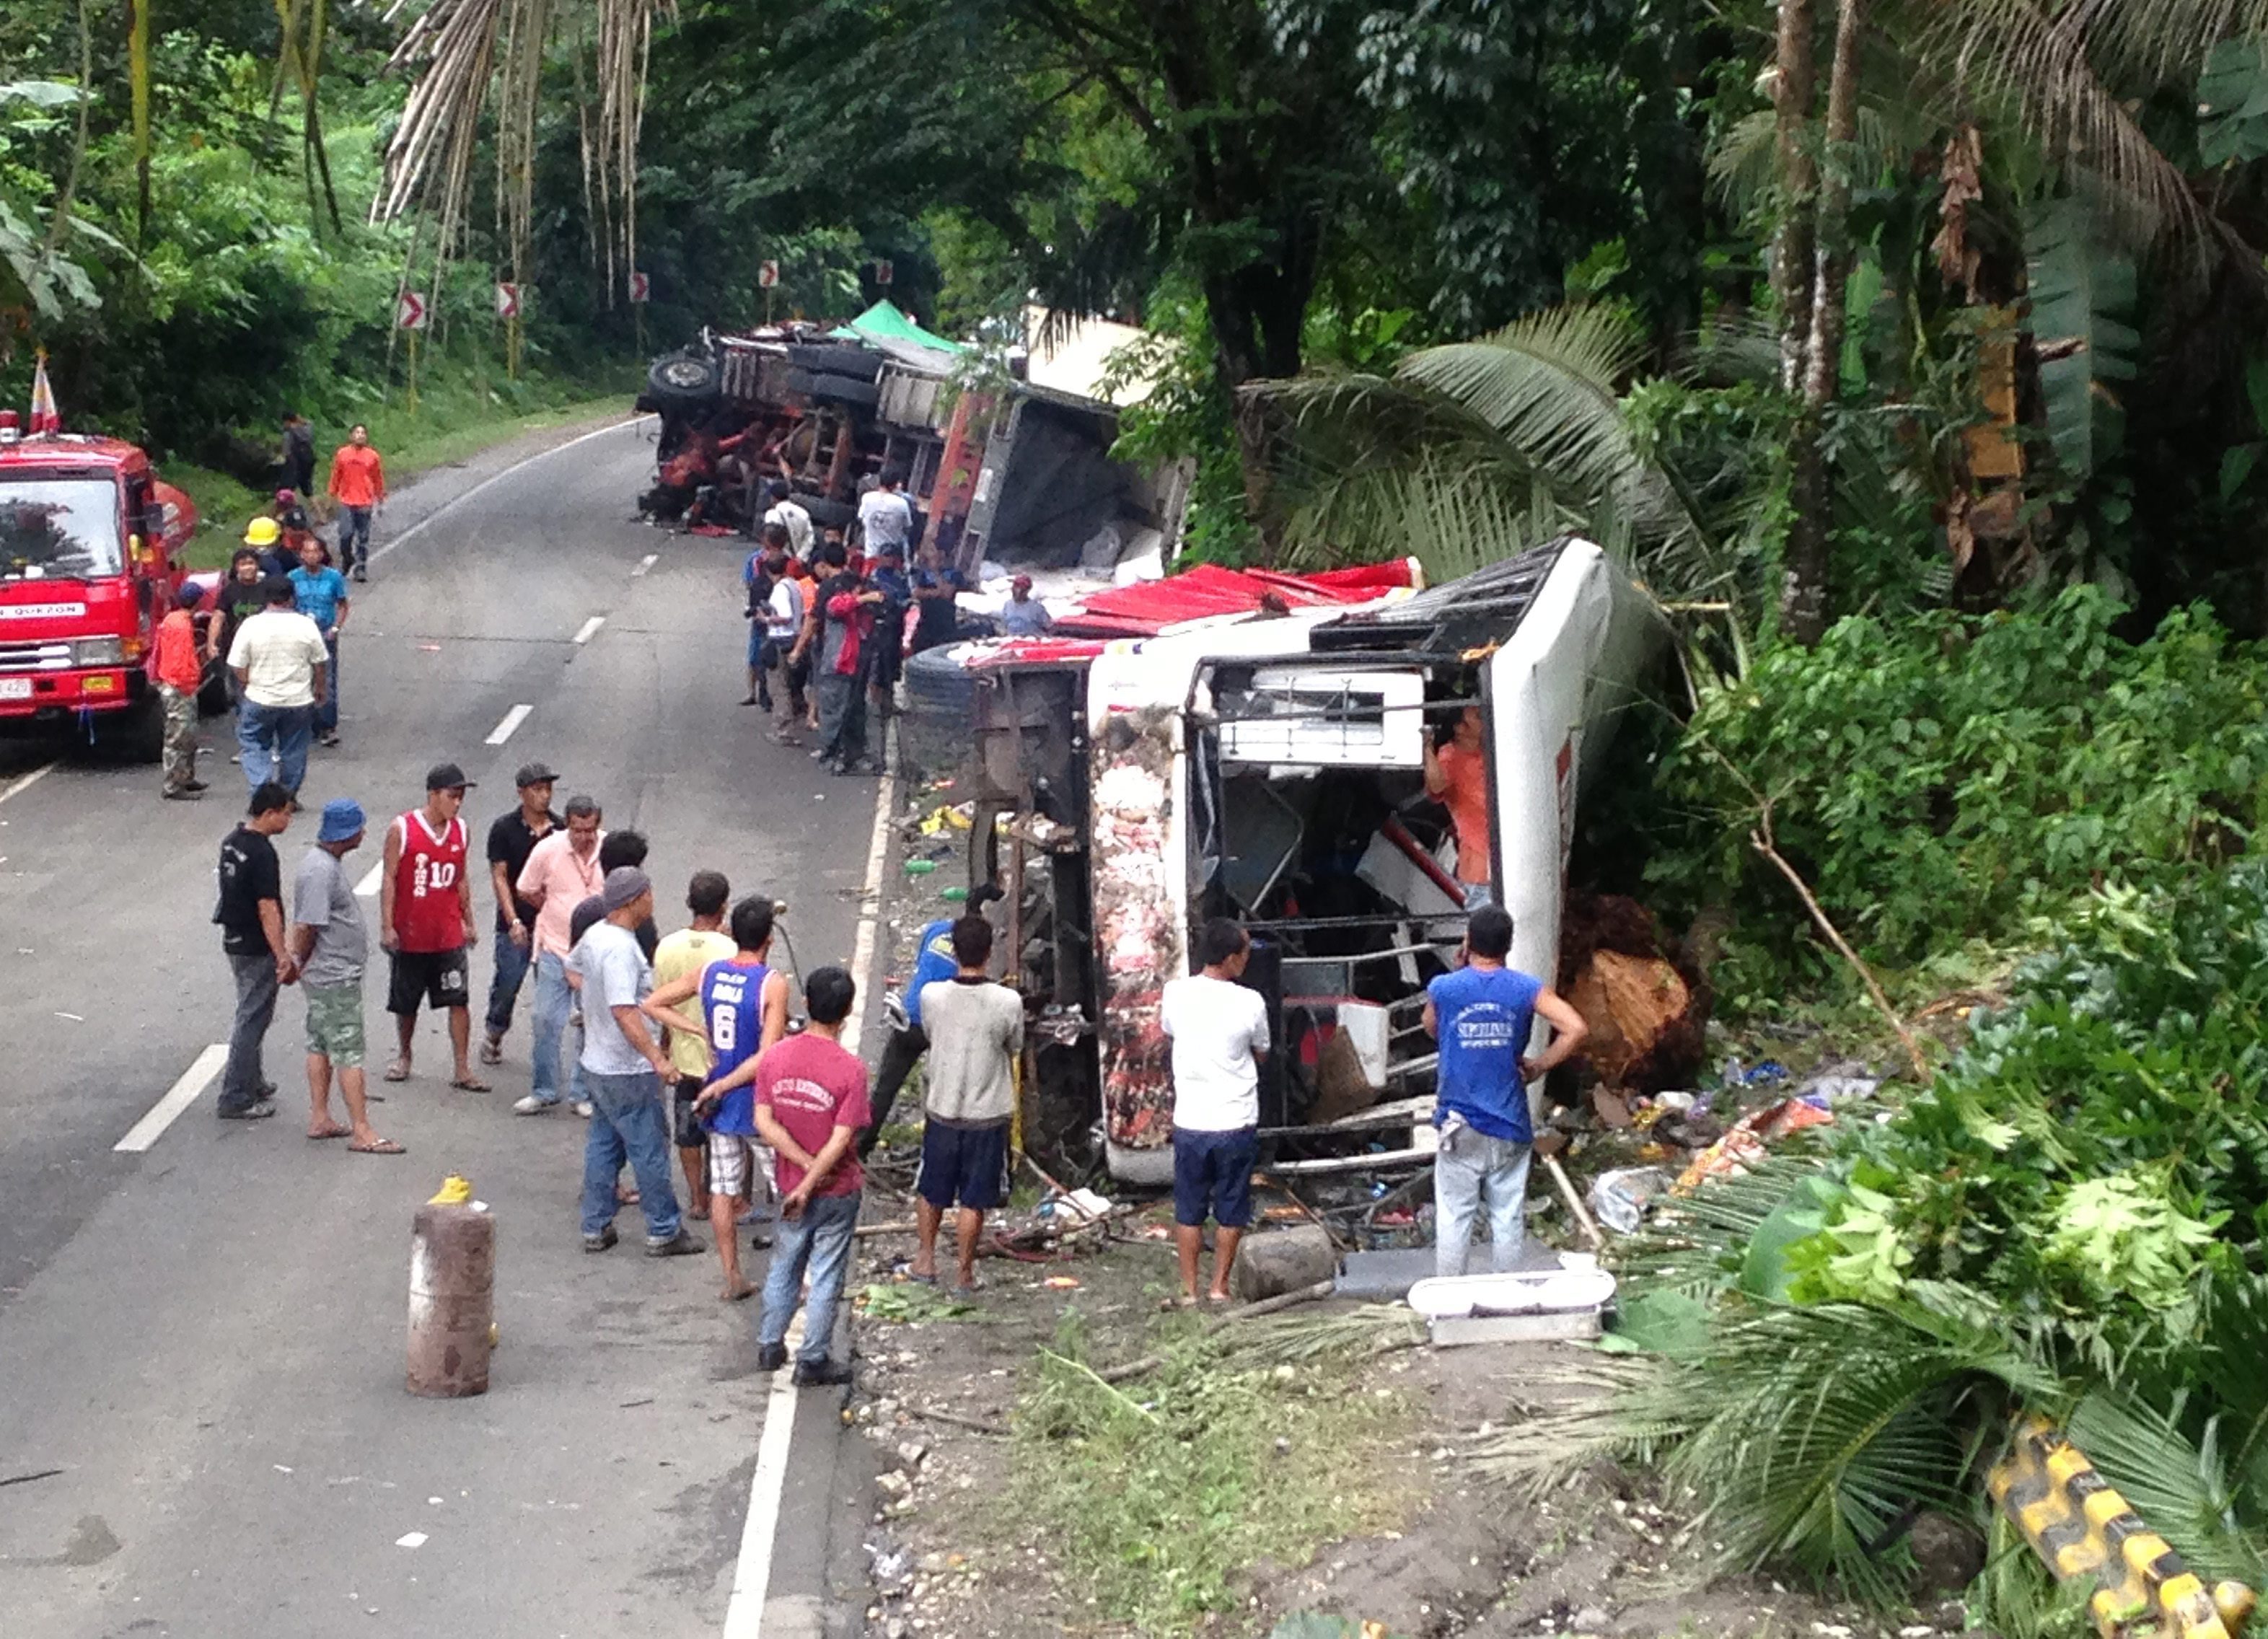 Filipino villagers view a wrecked passenger bus and a truck on a side of a road following an accident in the town of Atimonan, Quezon province, Philippines. Photo: EPA